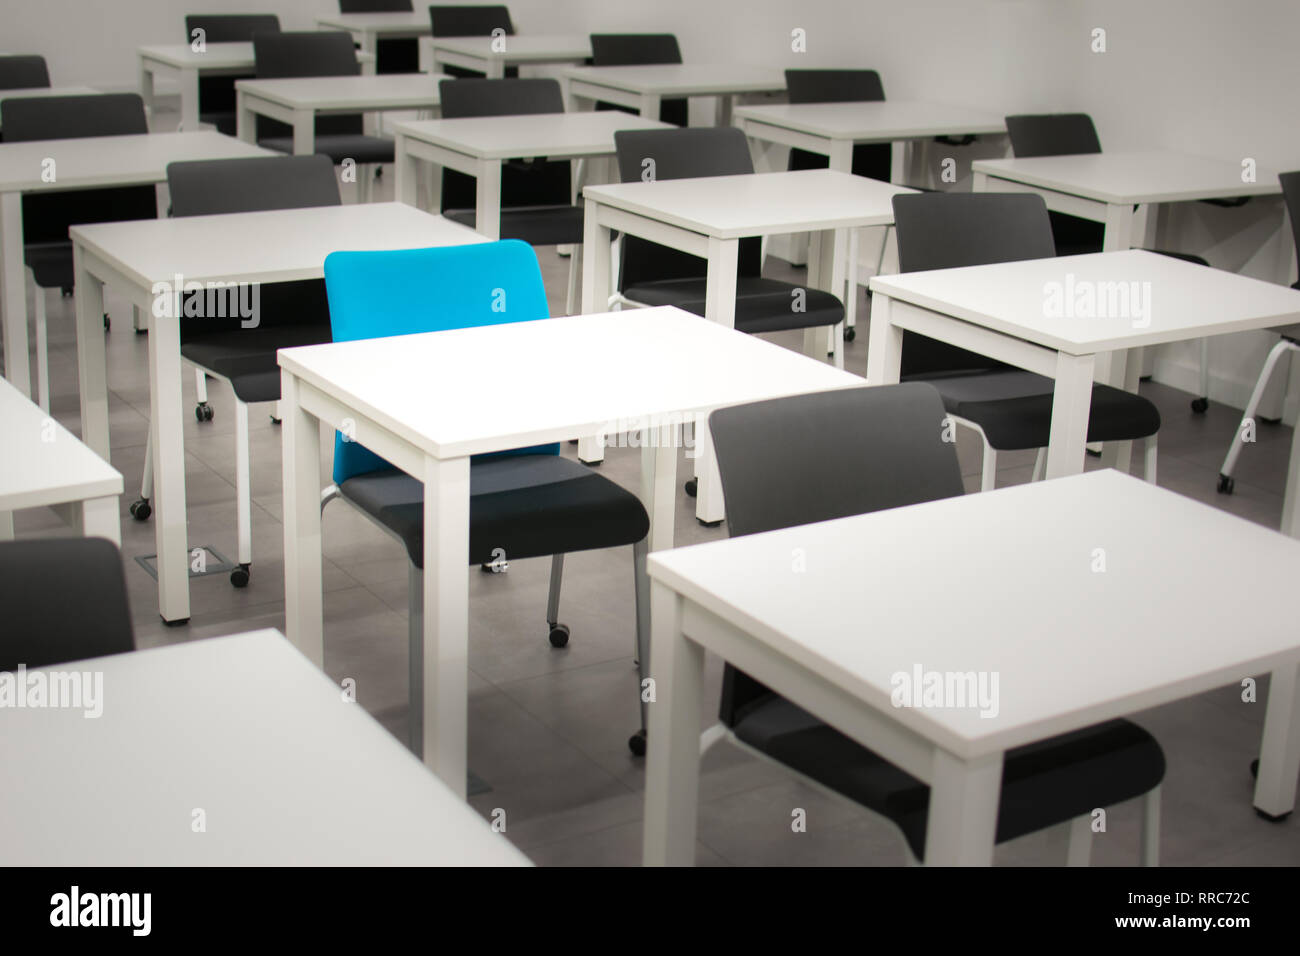 Classroom with black chairs and one blue chair. Hiring, vacant or choosing concept. White desks or tables Stock Photo